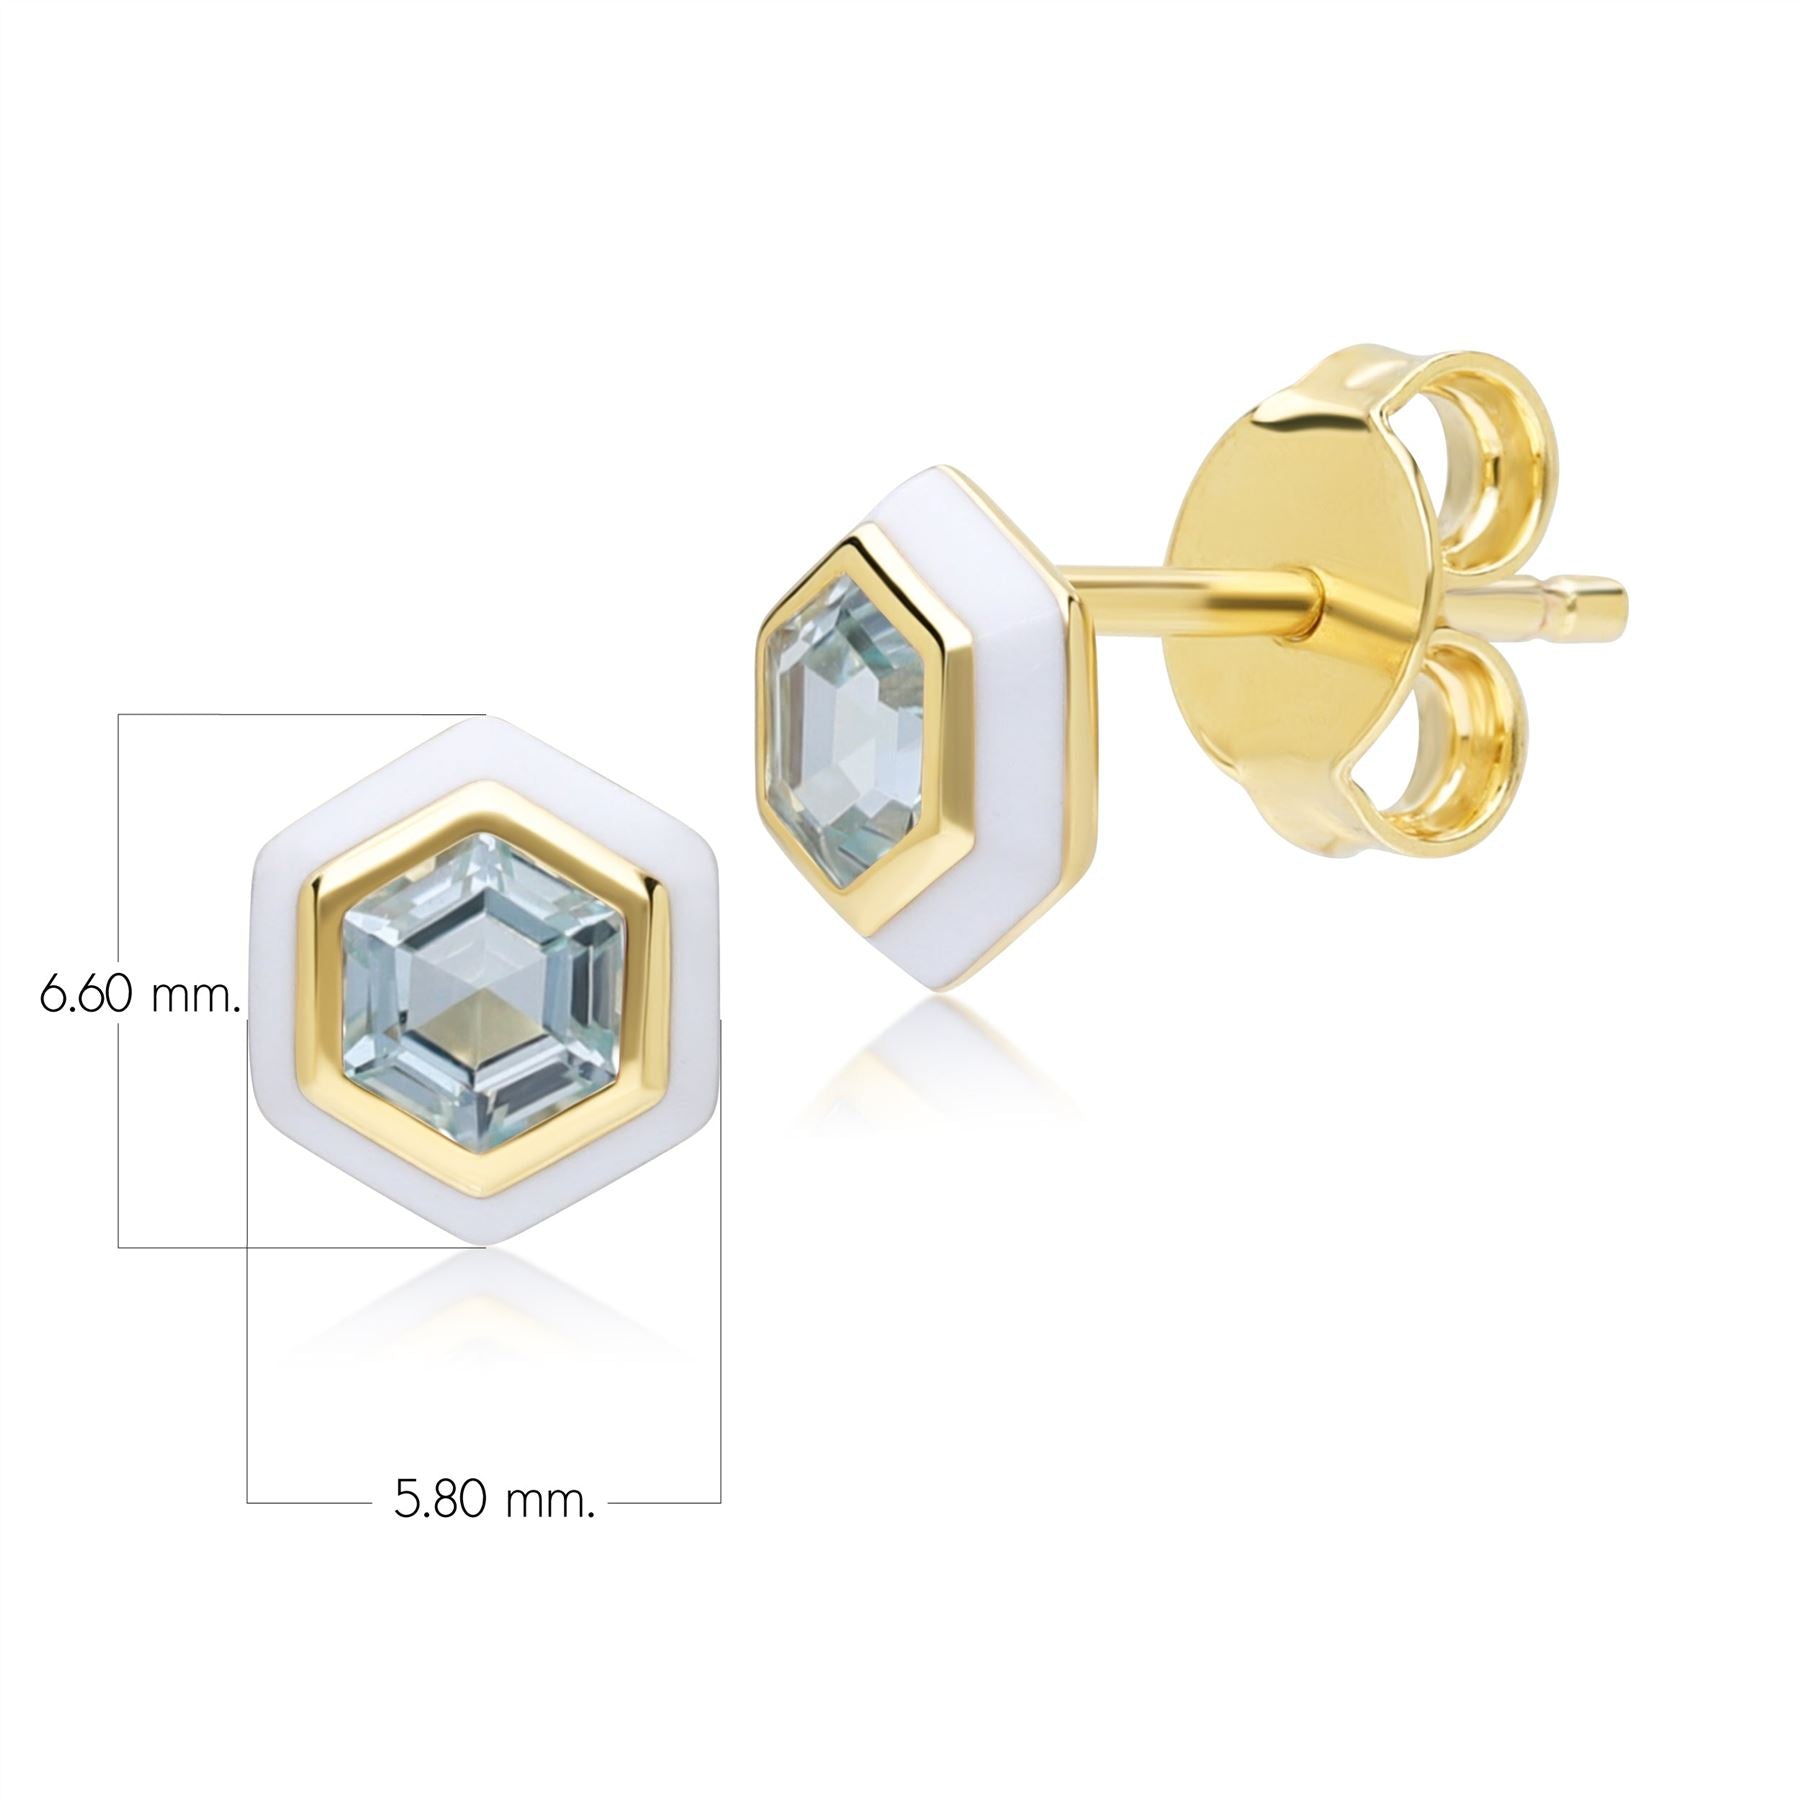 Geometric Hex Blue Topaz and White Enamel Stud Earrings in Gold Plated Sterling Silver Dimensions 